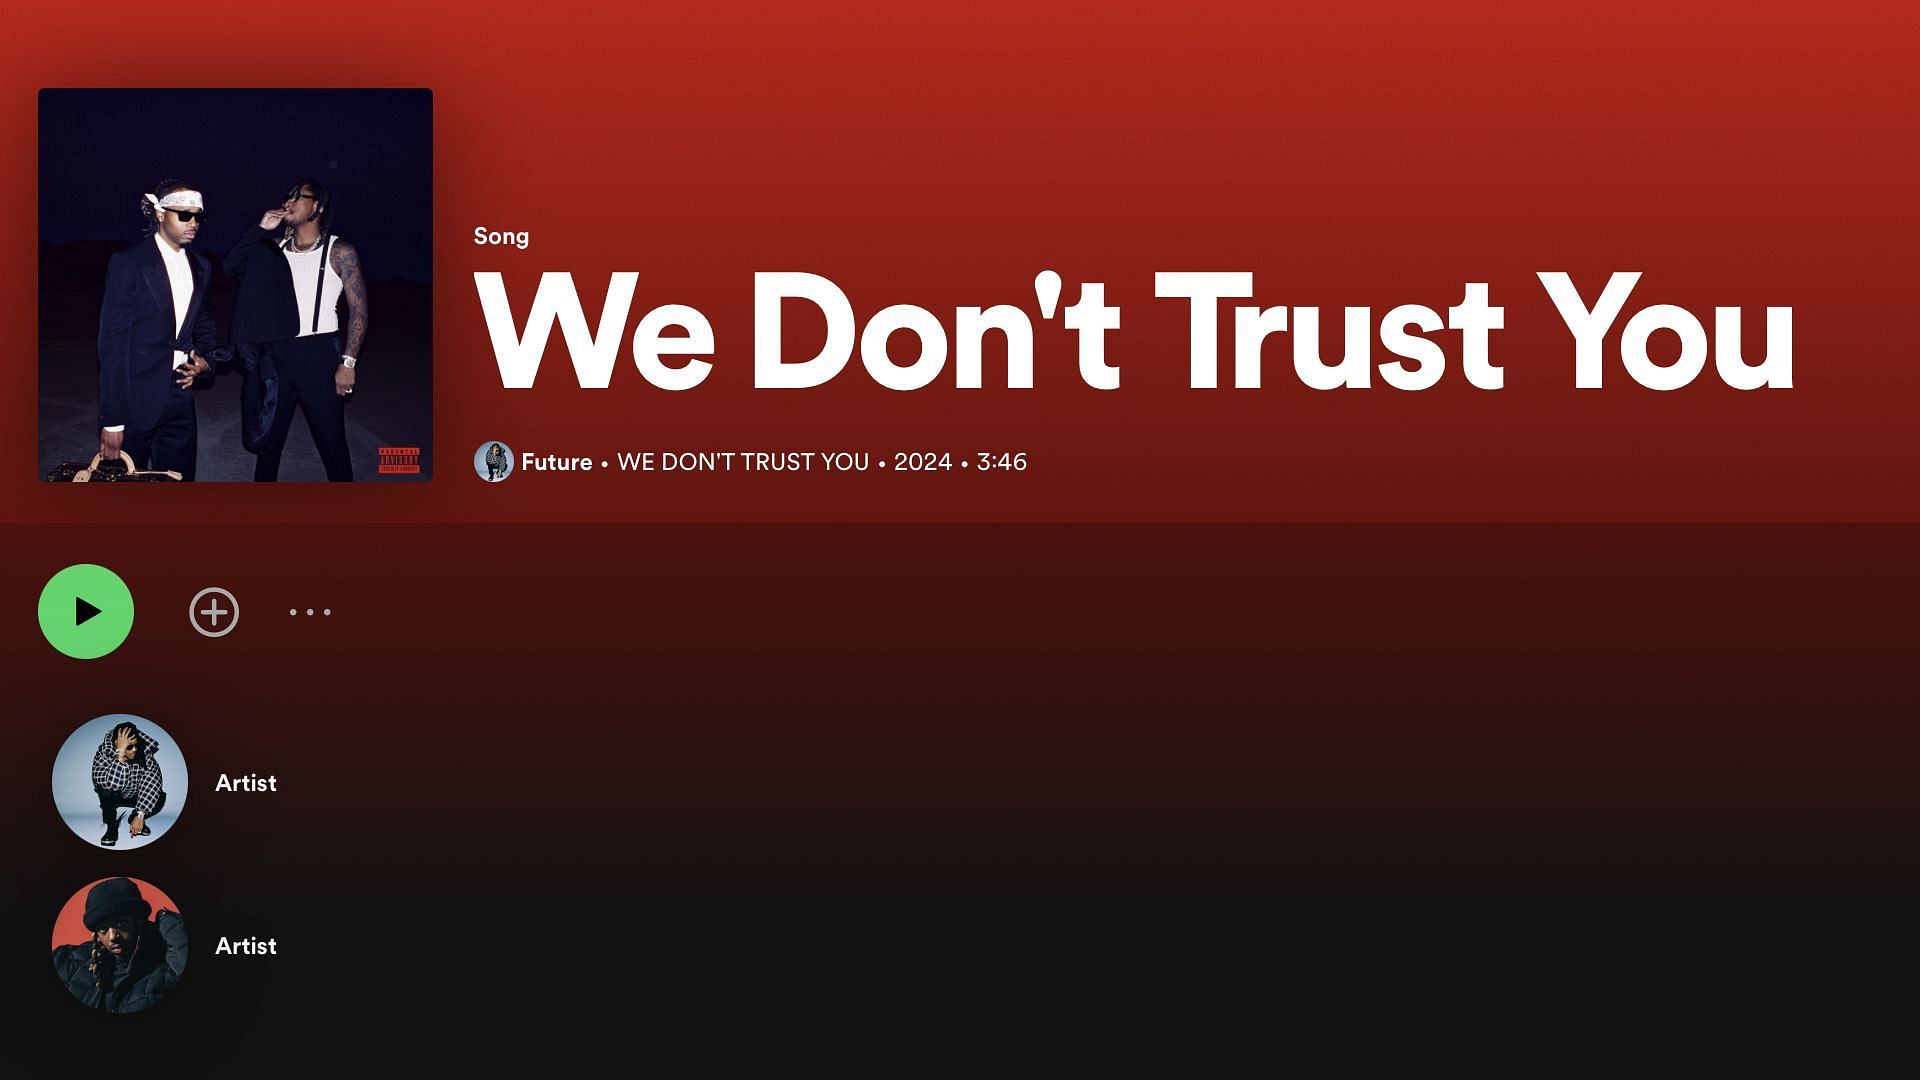 Track 1 on Future and Metro Boomin&#039;s album &#039;We Don&#039;t Trust You&#039; (Image via Spotify)